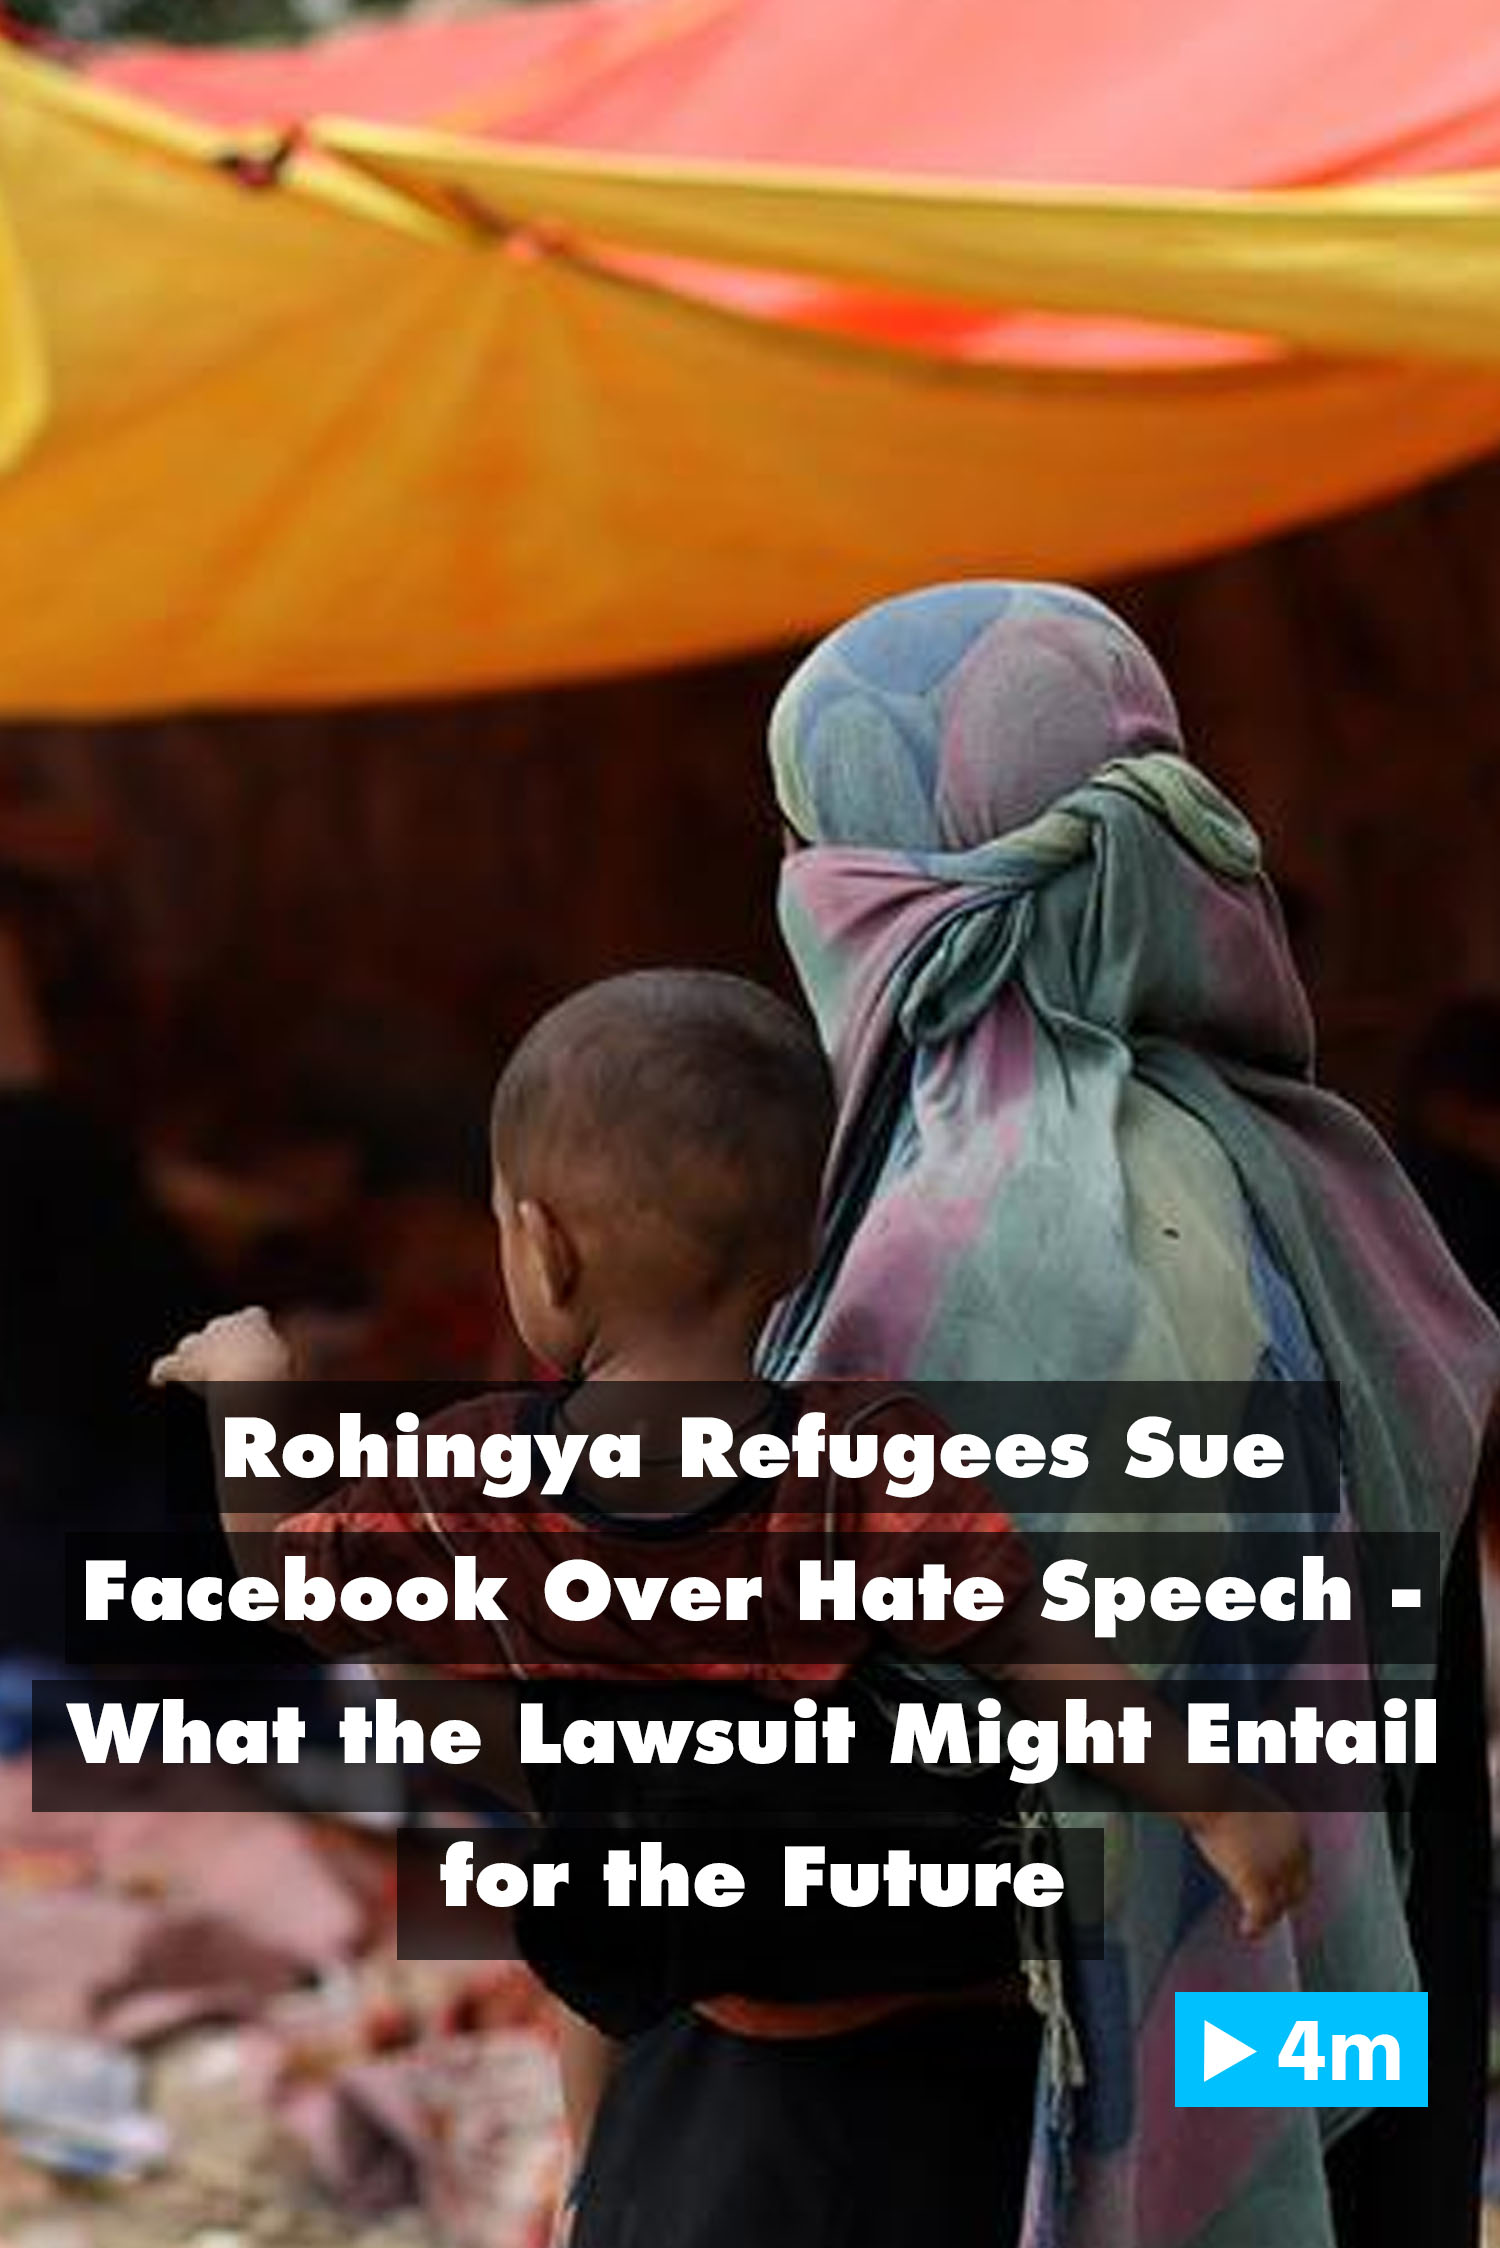 Rohingya refugees sue Facebook over hate speech - what the lawsuit might entail for the future